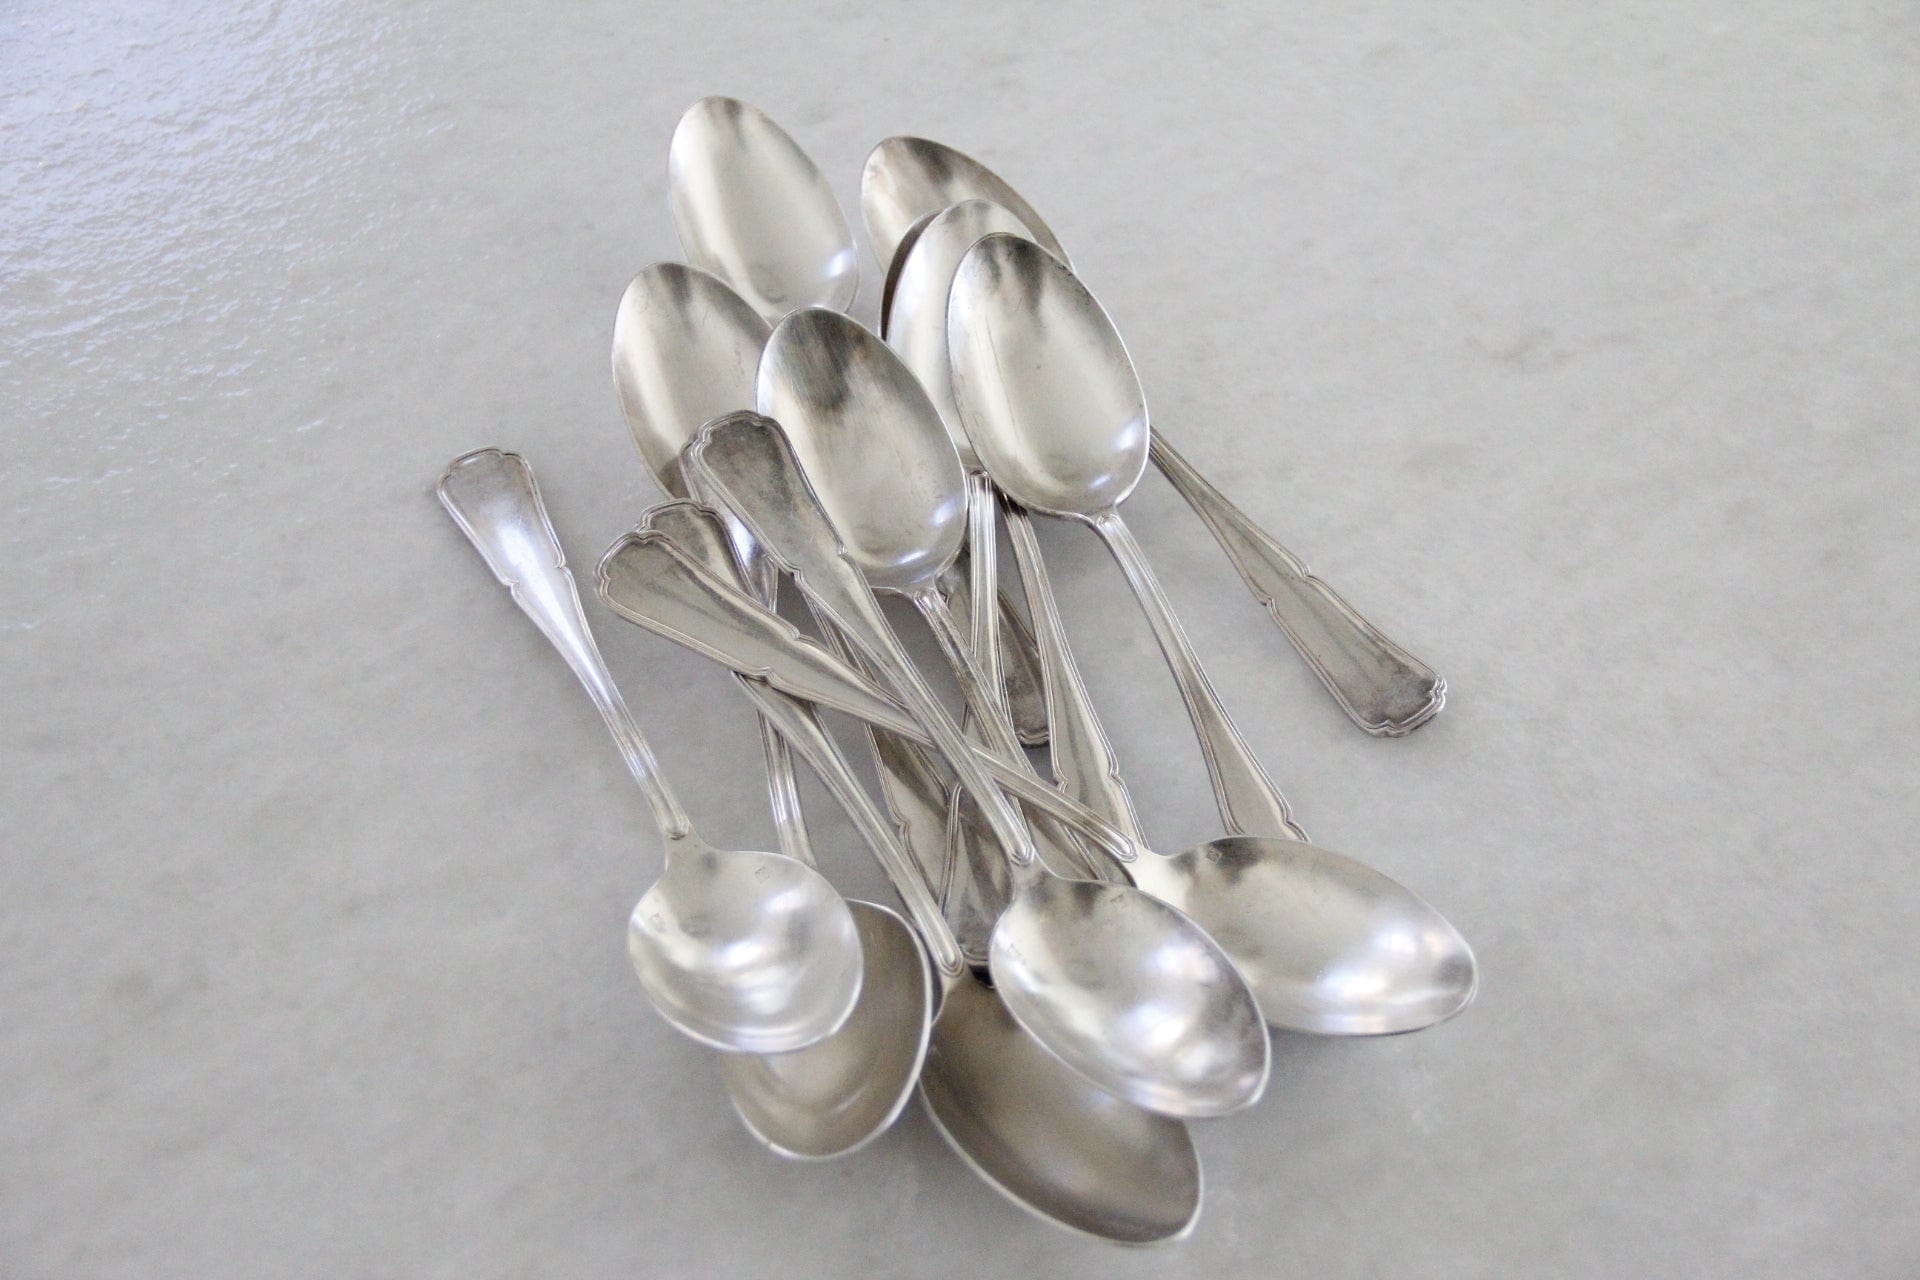 Antique French Silver Tablespoon Serving Spoon | Flatware 4 Pcs. Tableware